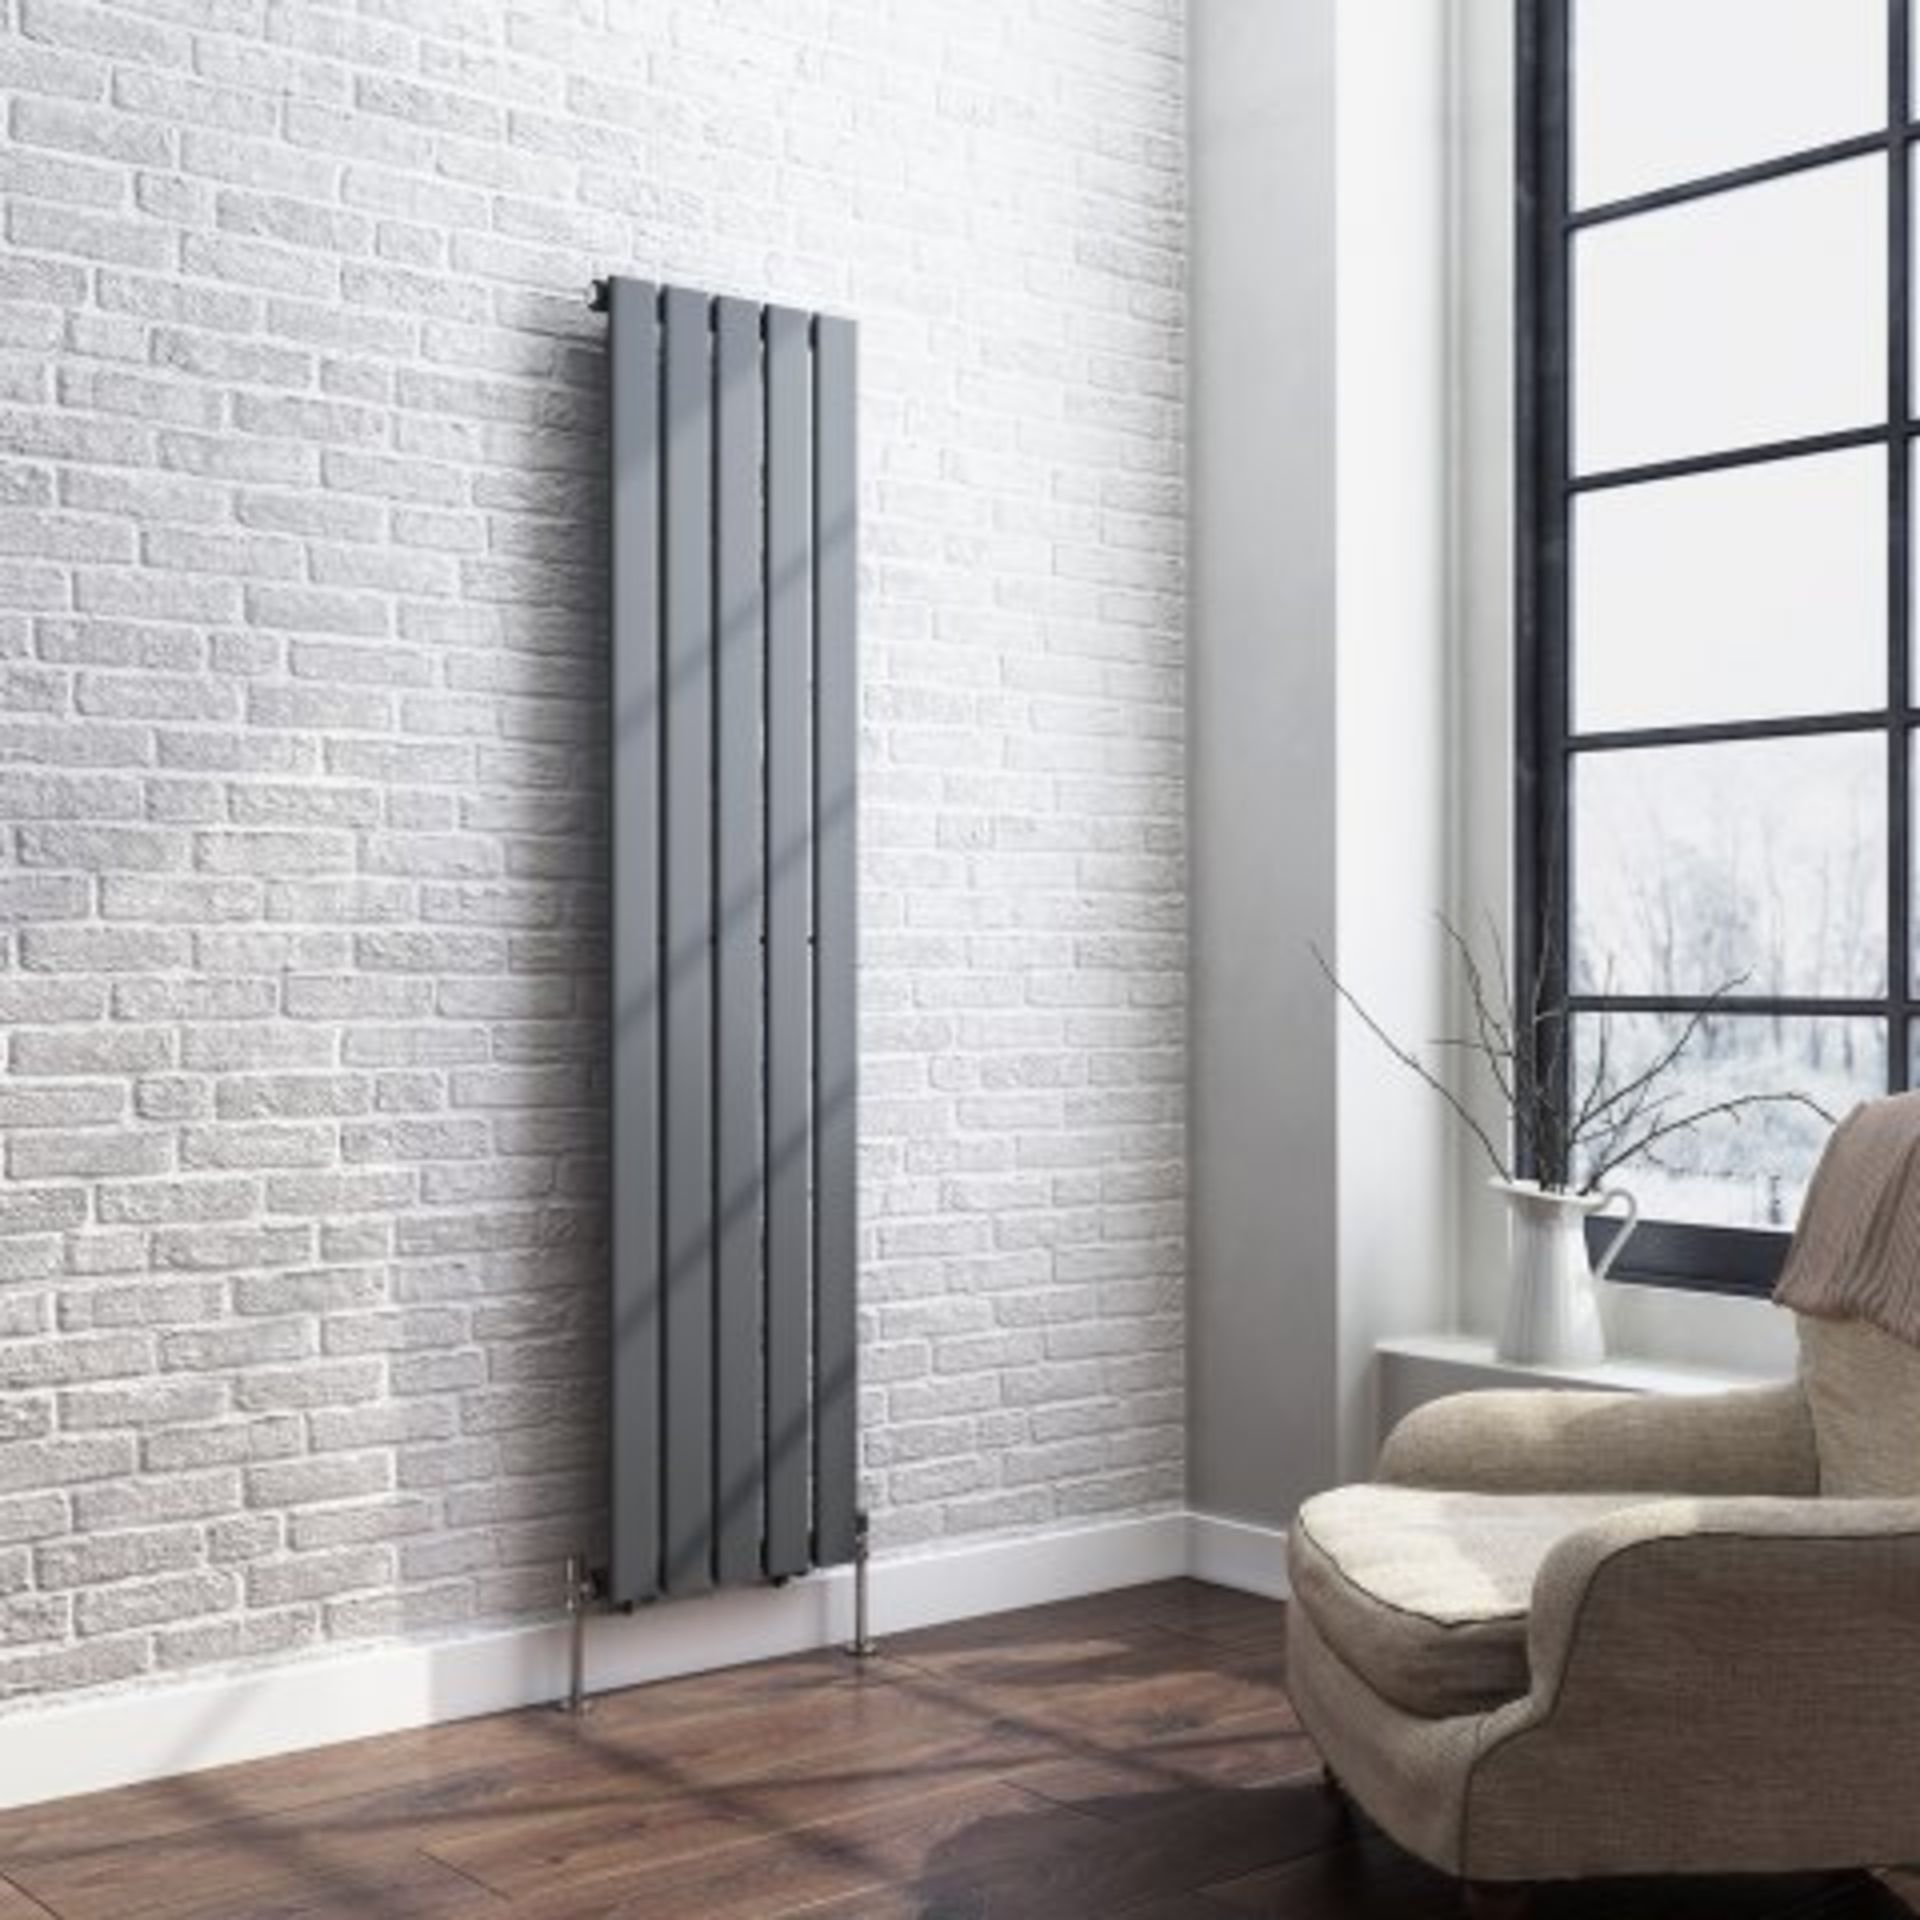 (I4) 1600x376mm Anthracite Single Flat Panel Vertical Radiator RRP £275.99 Designer Touch Ultra- - Image 2 of 3